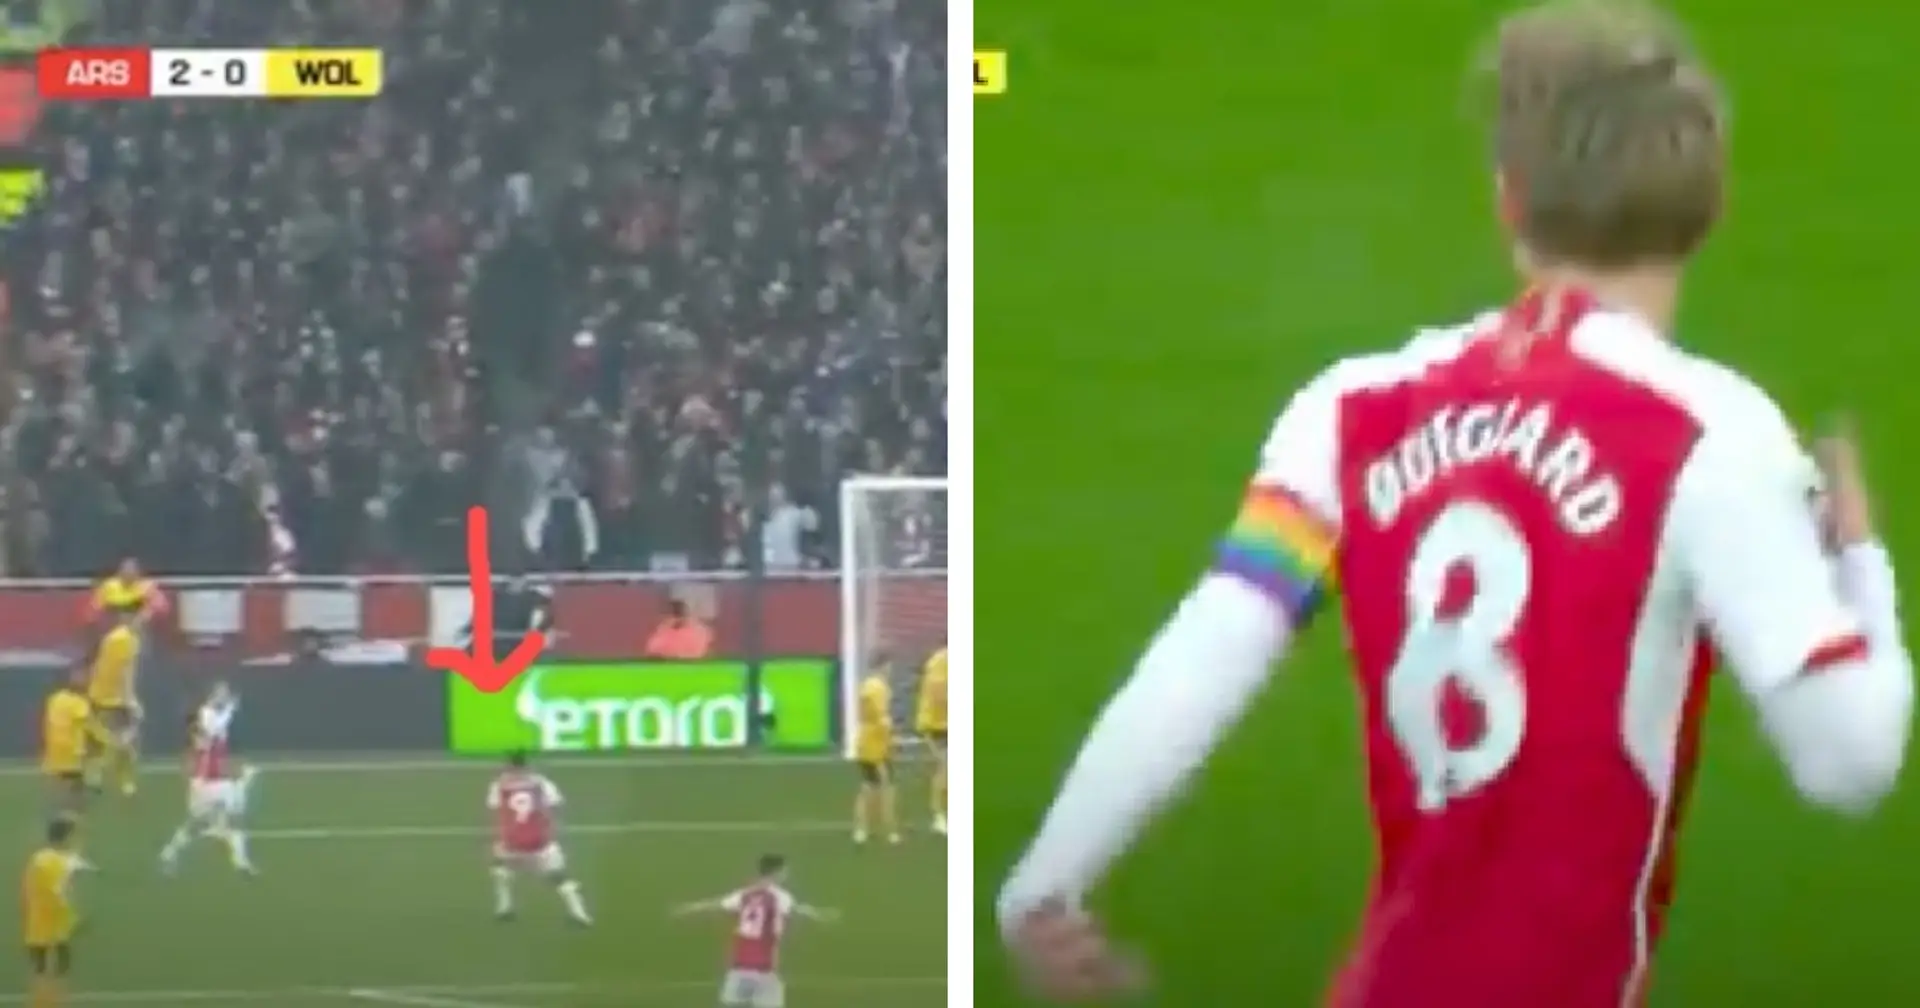 SPOTTED: Jesus' brilliant reaction to Odegaard's goal - he didn't join his skipper to celebrate